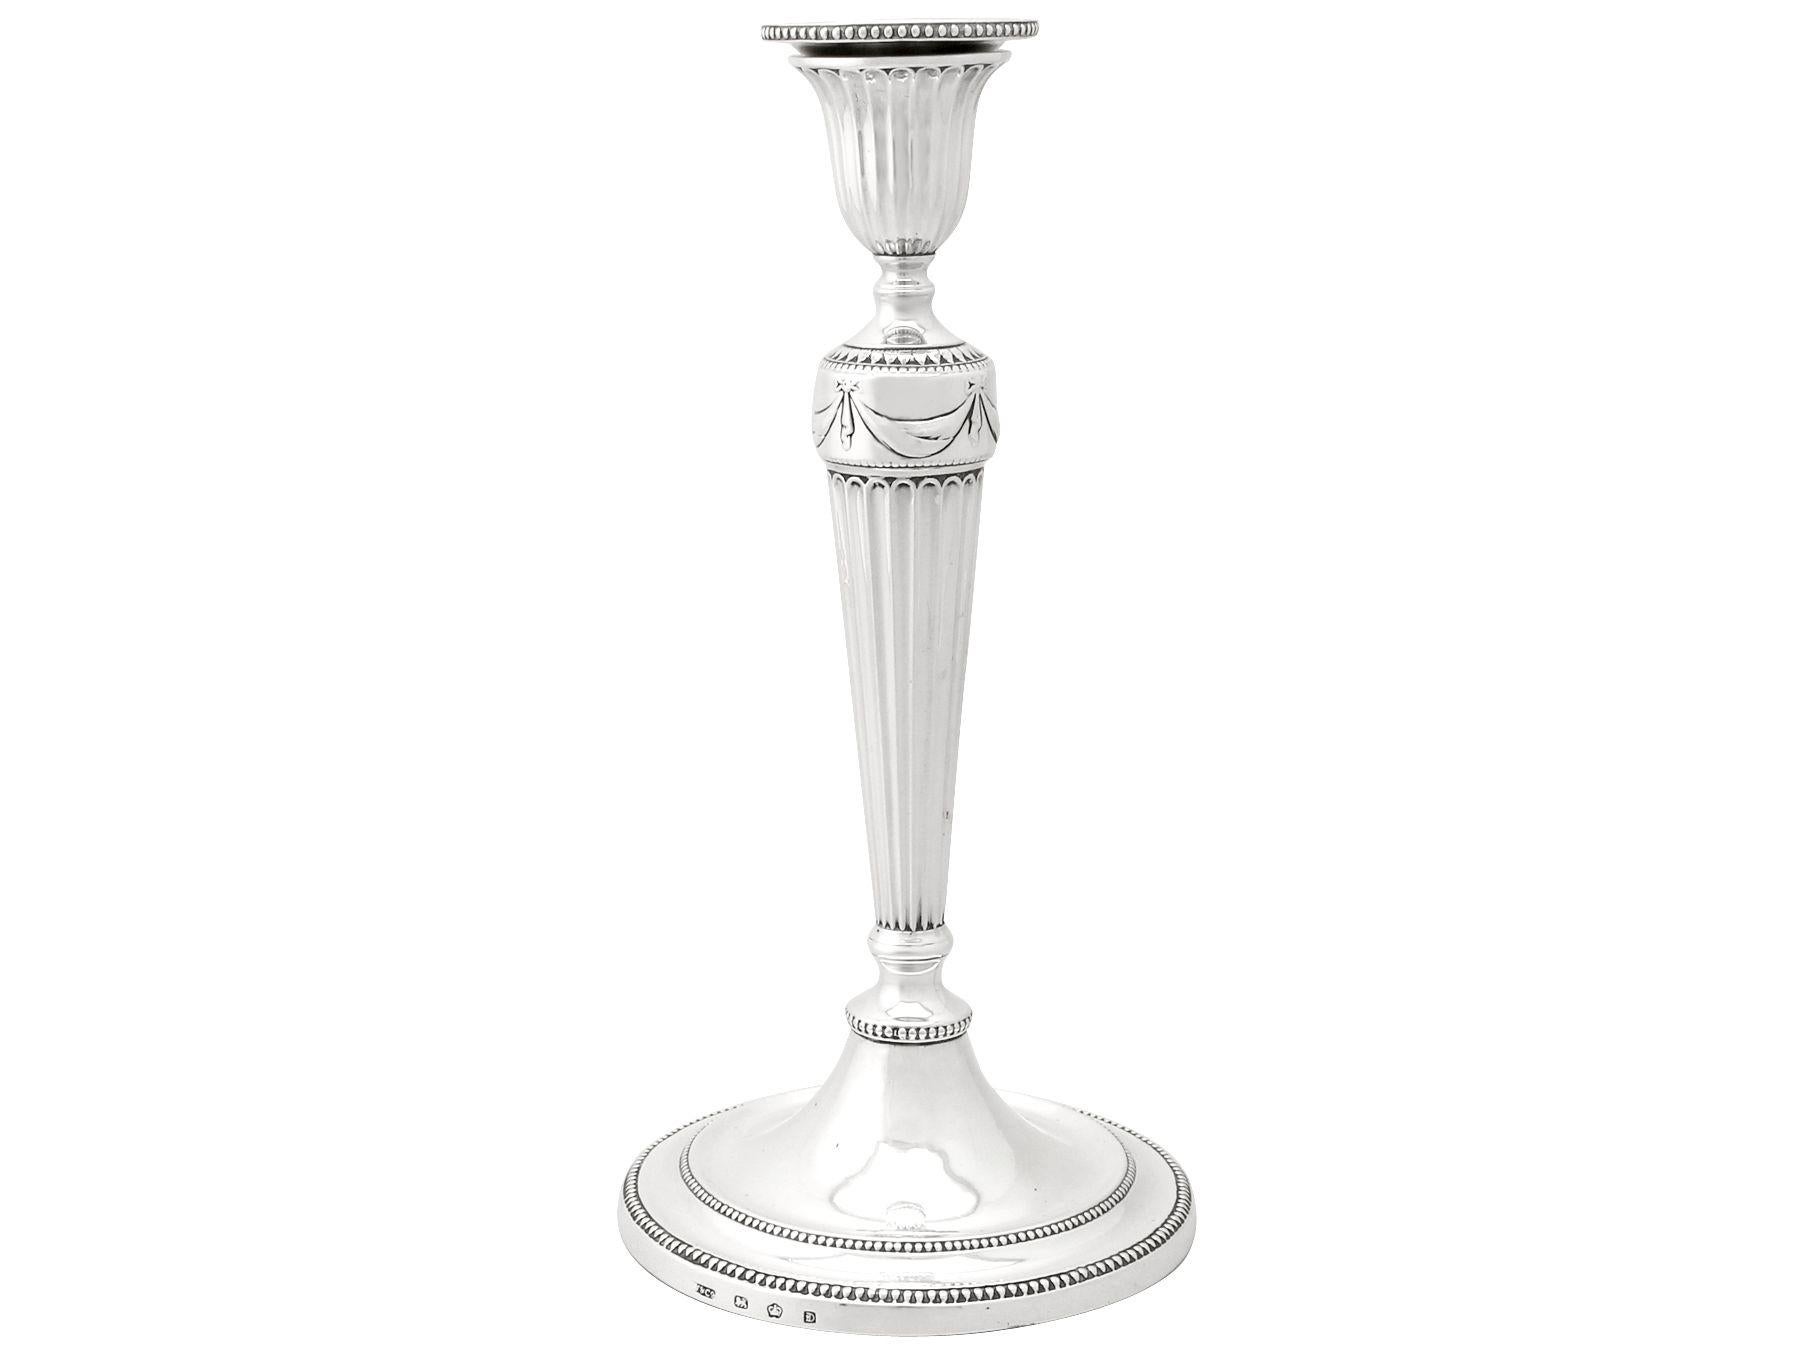 sterling silver candle holders